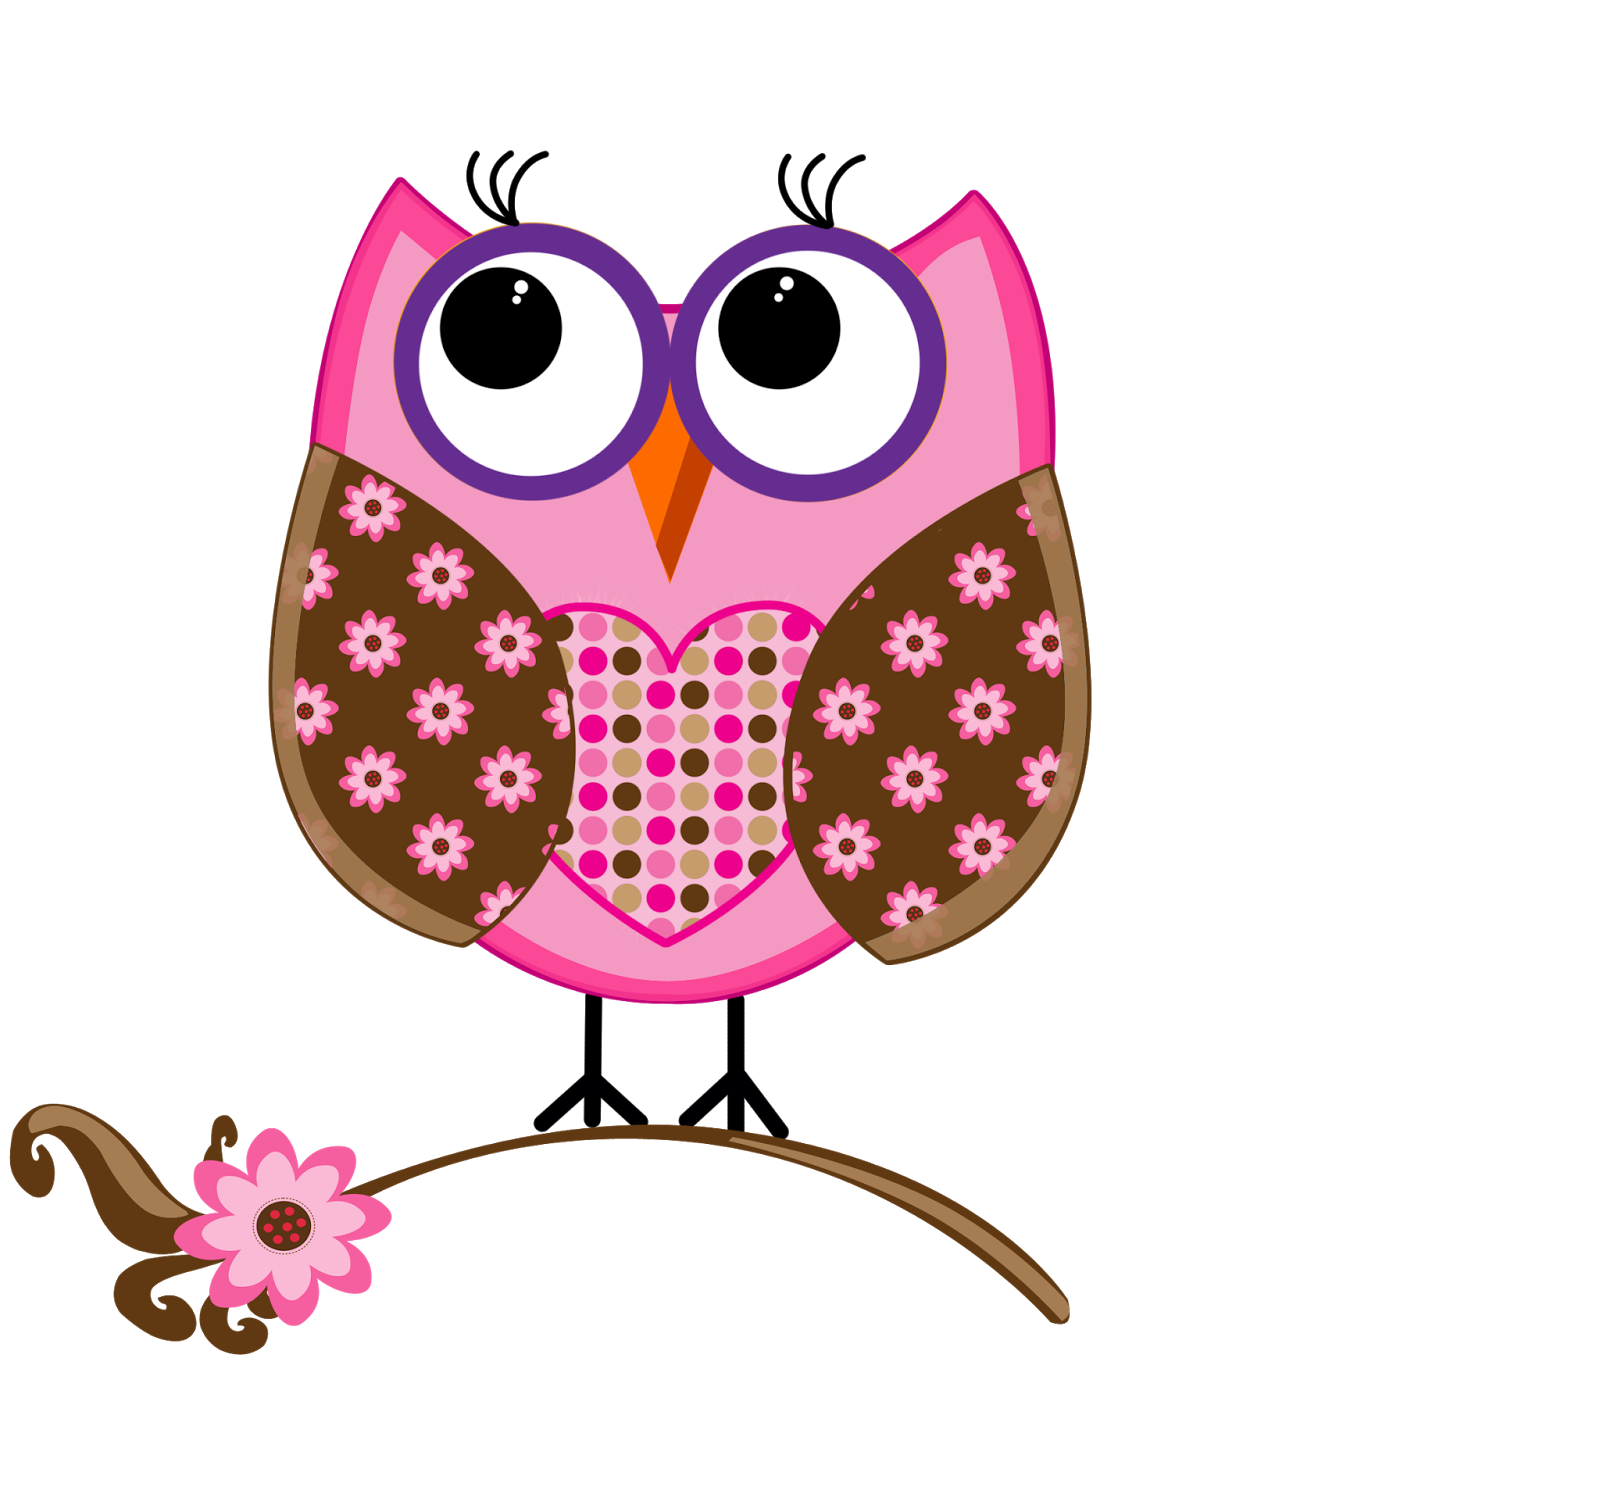 Owl clipart shabby chic. Imagen stickers png yahoo